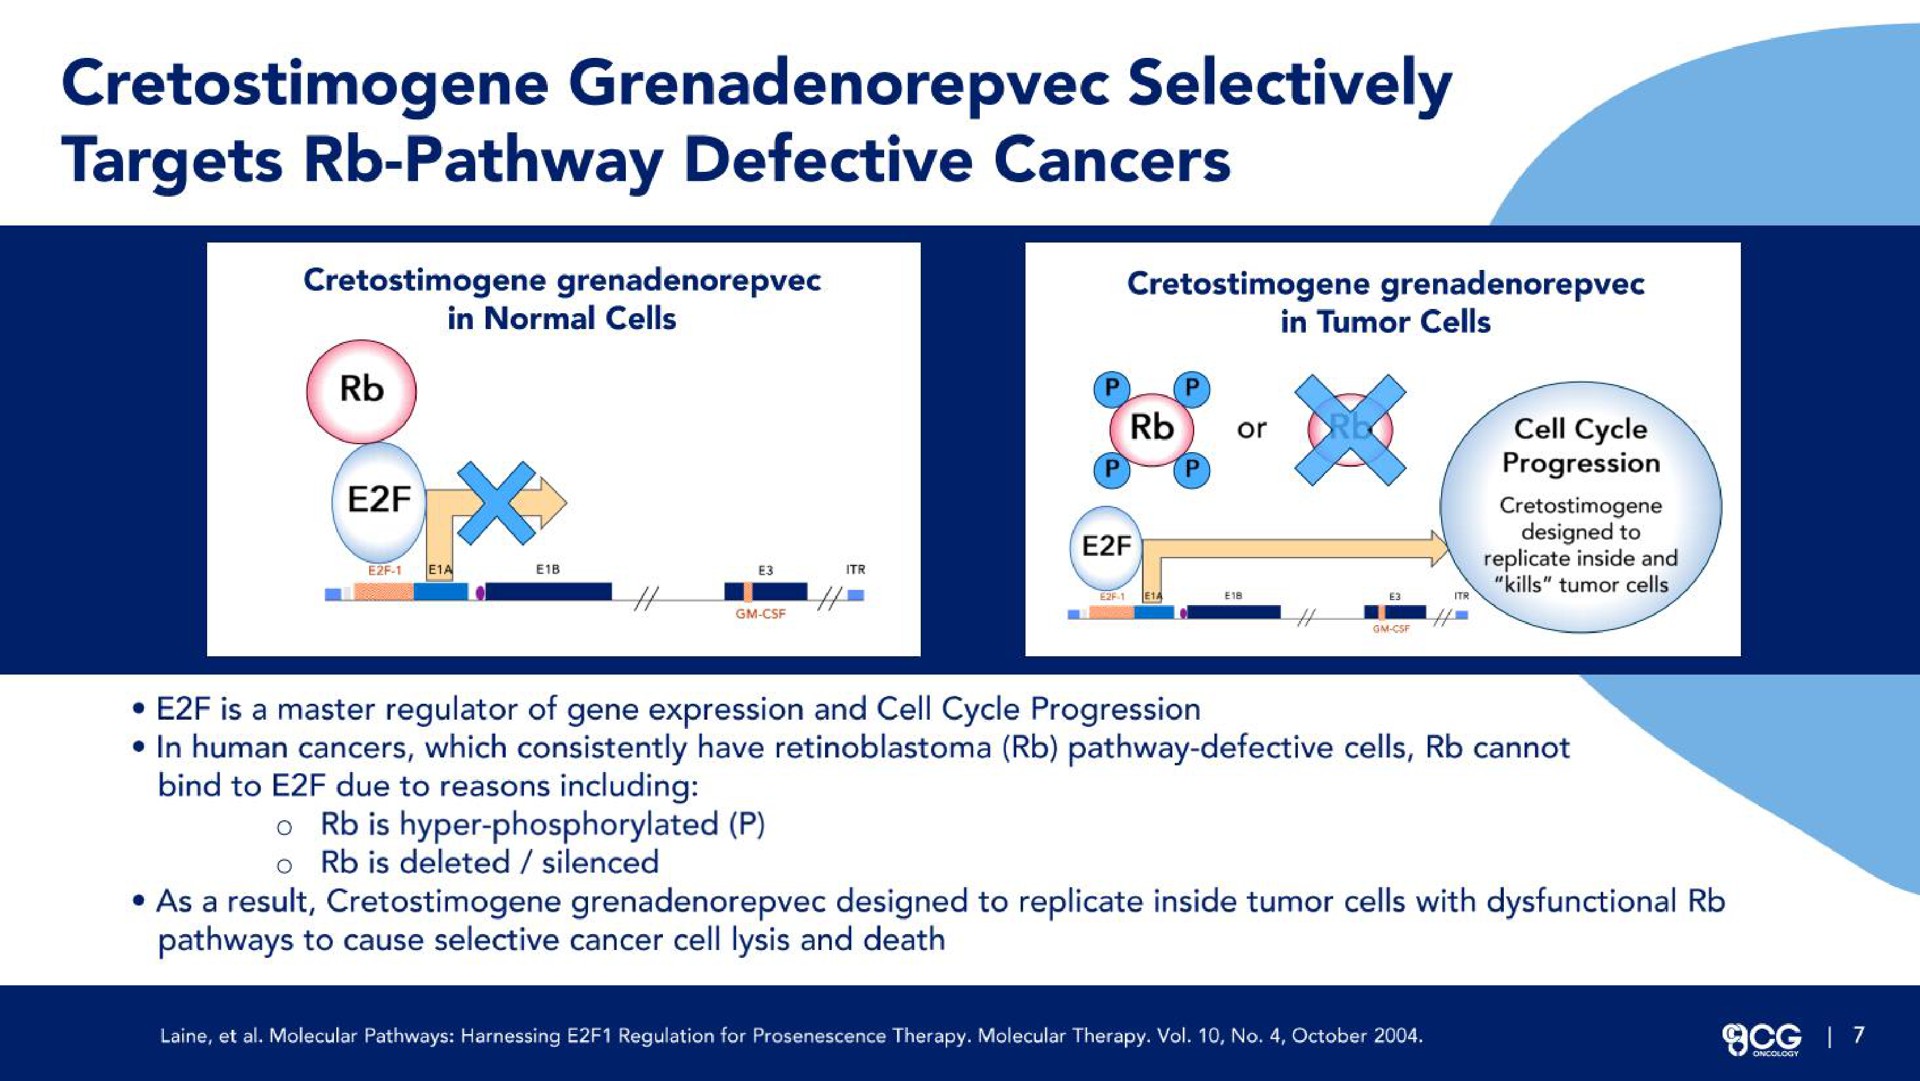 selectively targets pathway defective cancers | CG Oncology